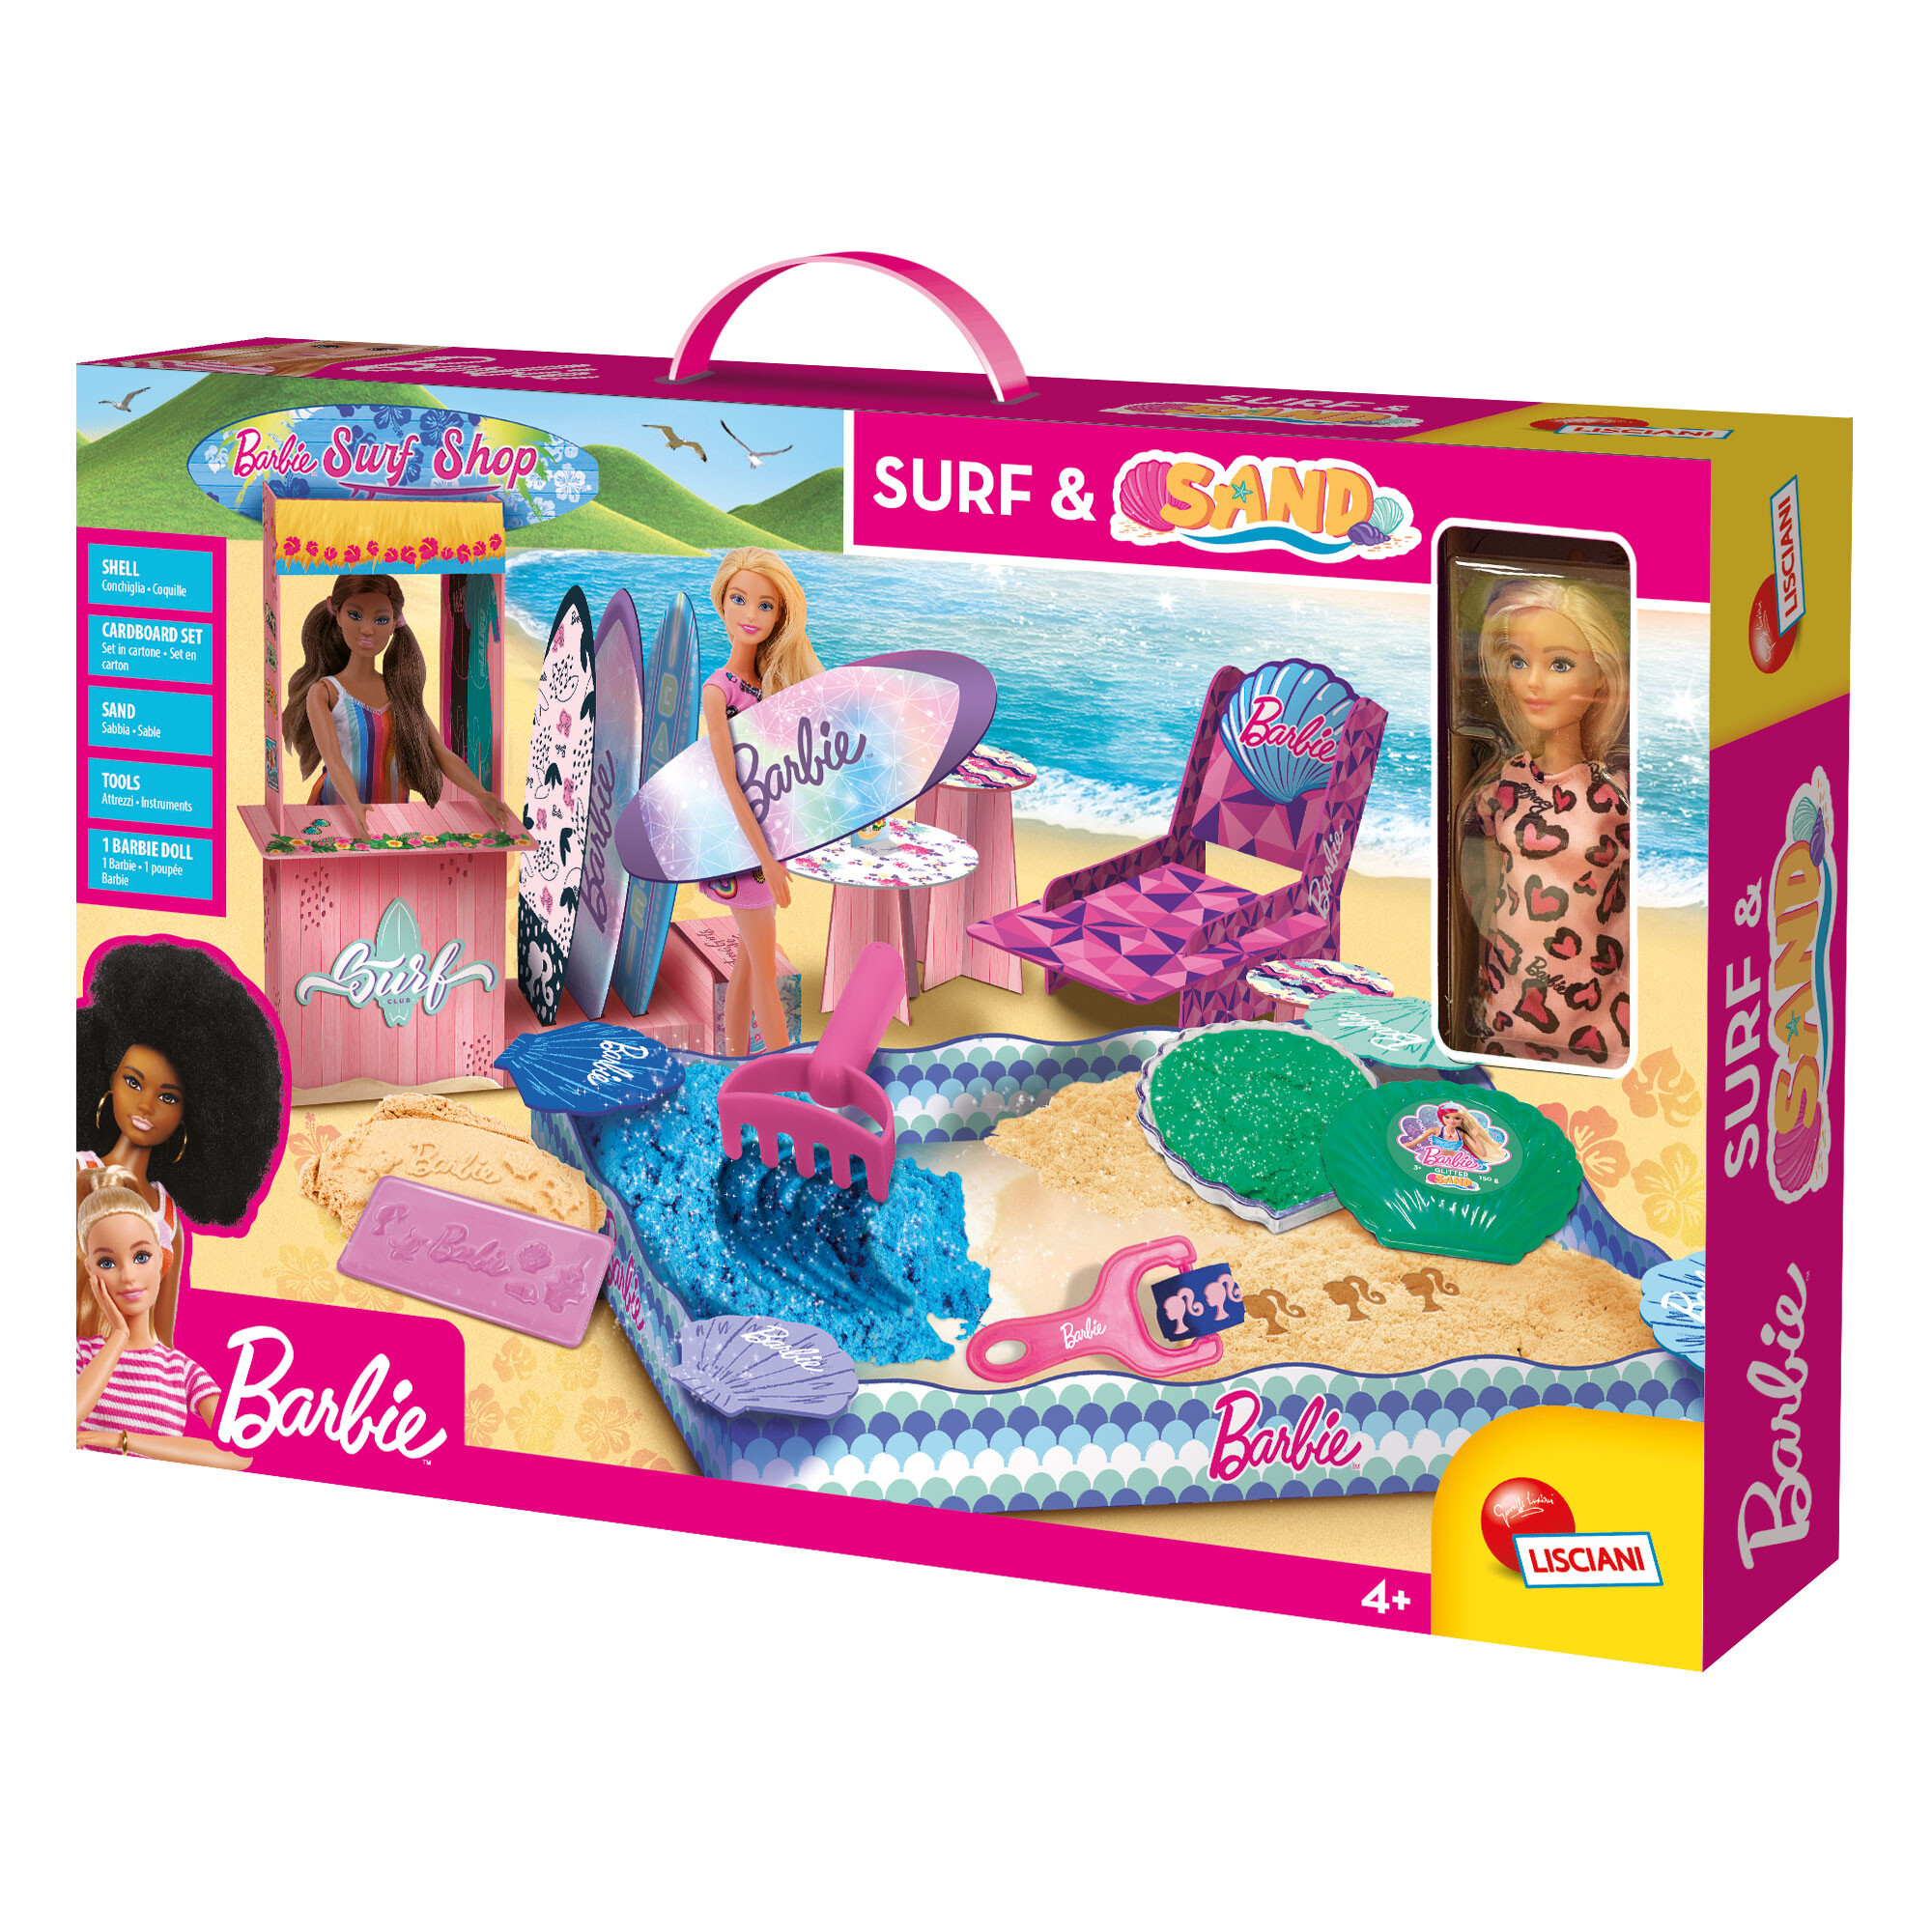 Barbie surf & sand  (doll included) - LISCIANI